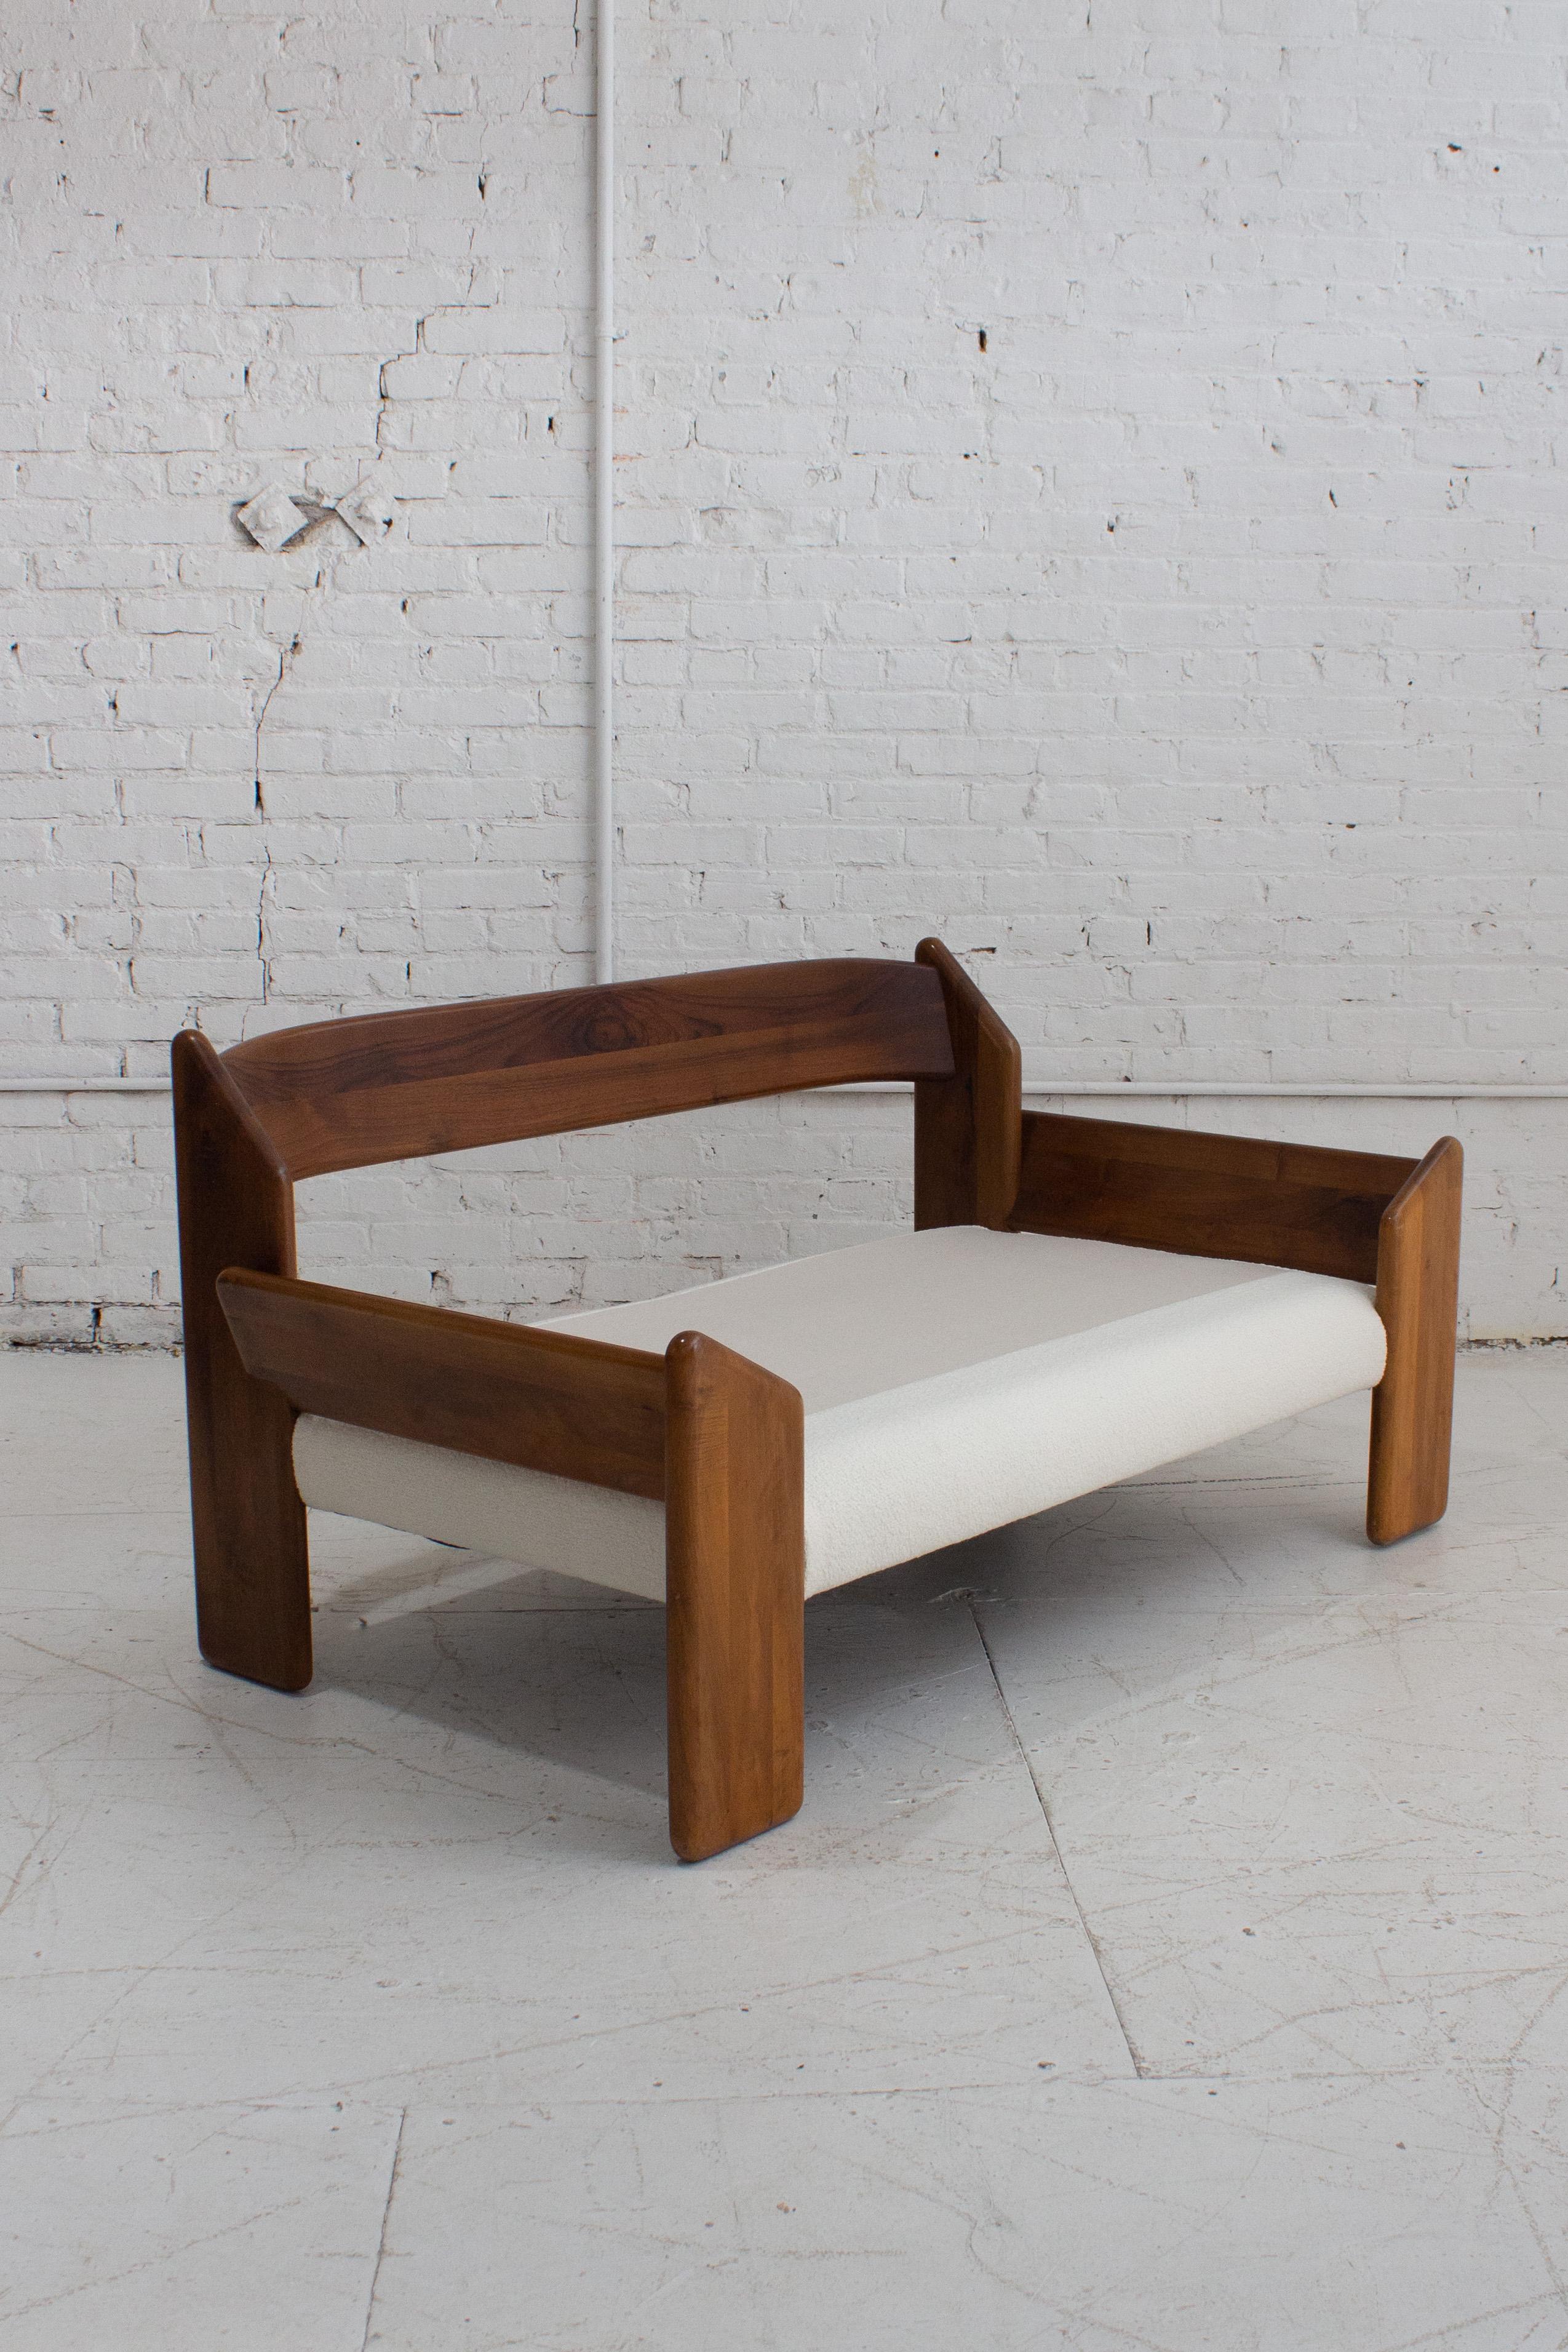 'Sapporo' Wood Frame Two Seat Sofa by Mario Marenco for Mobil Girgi For Sale 5